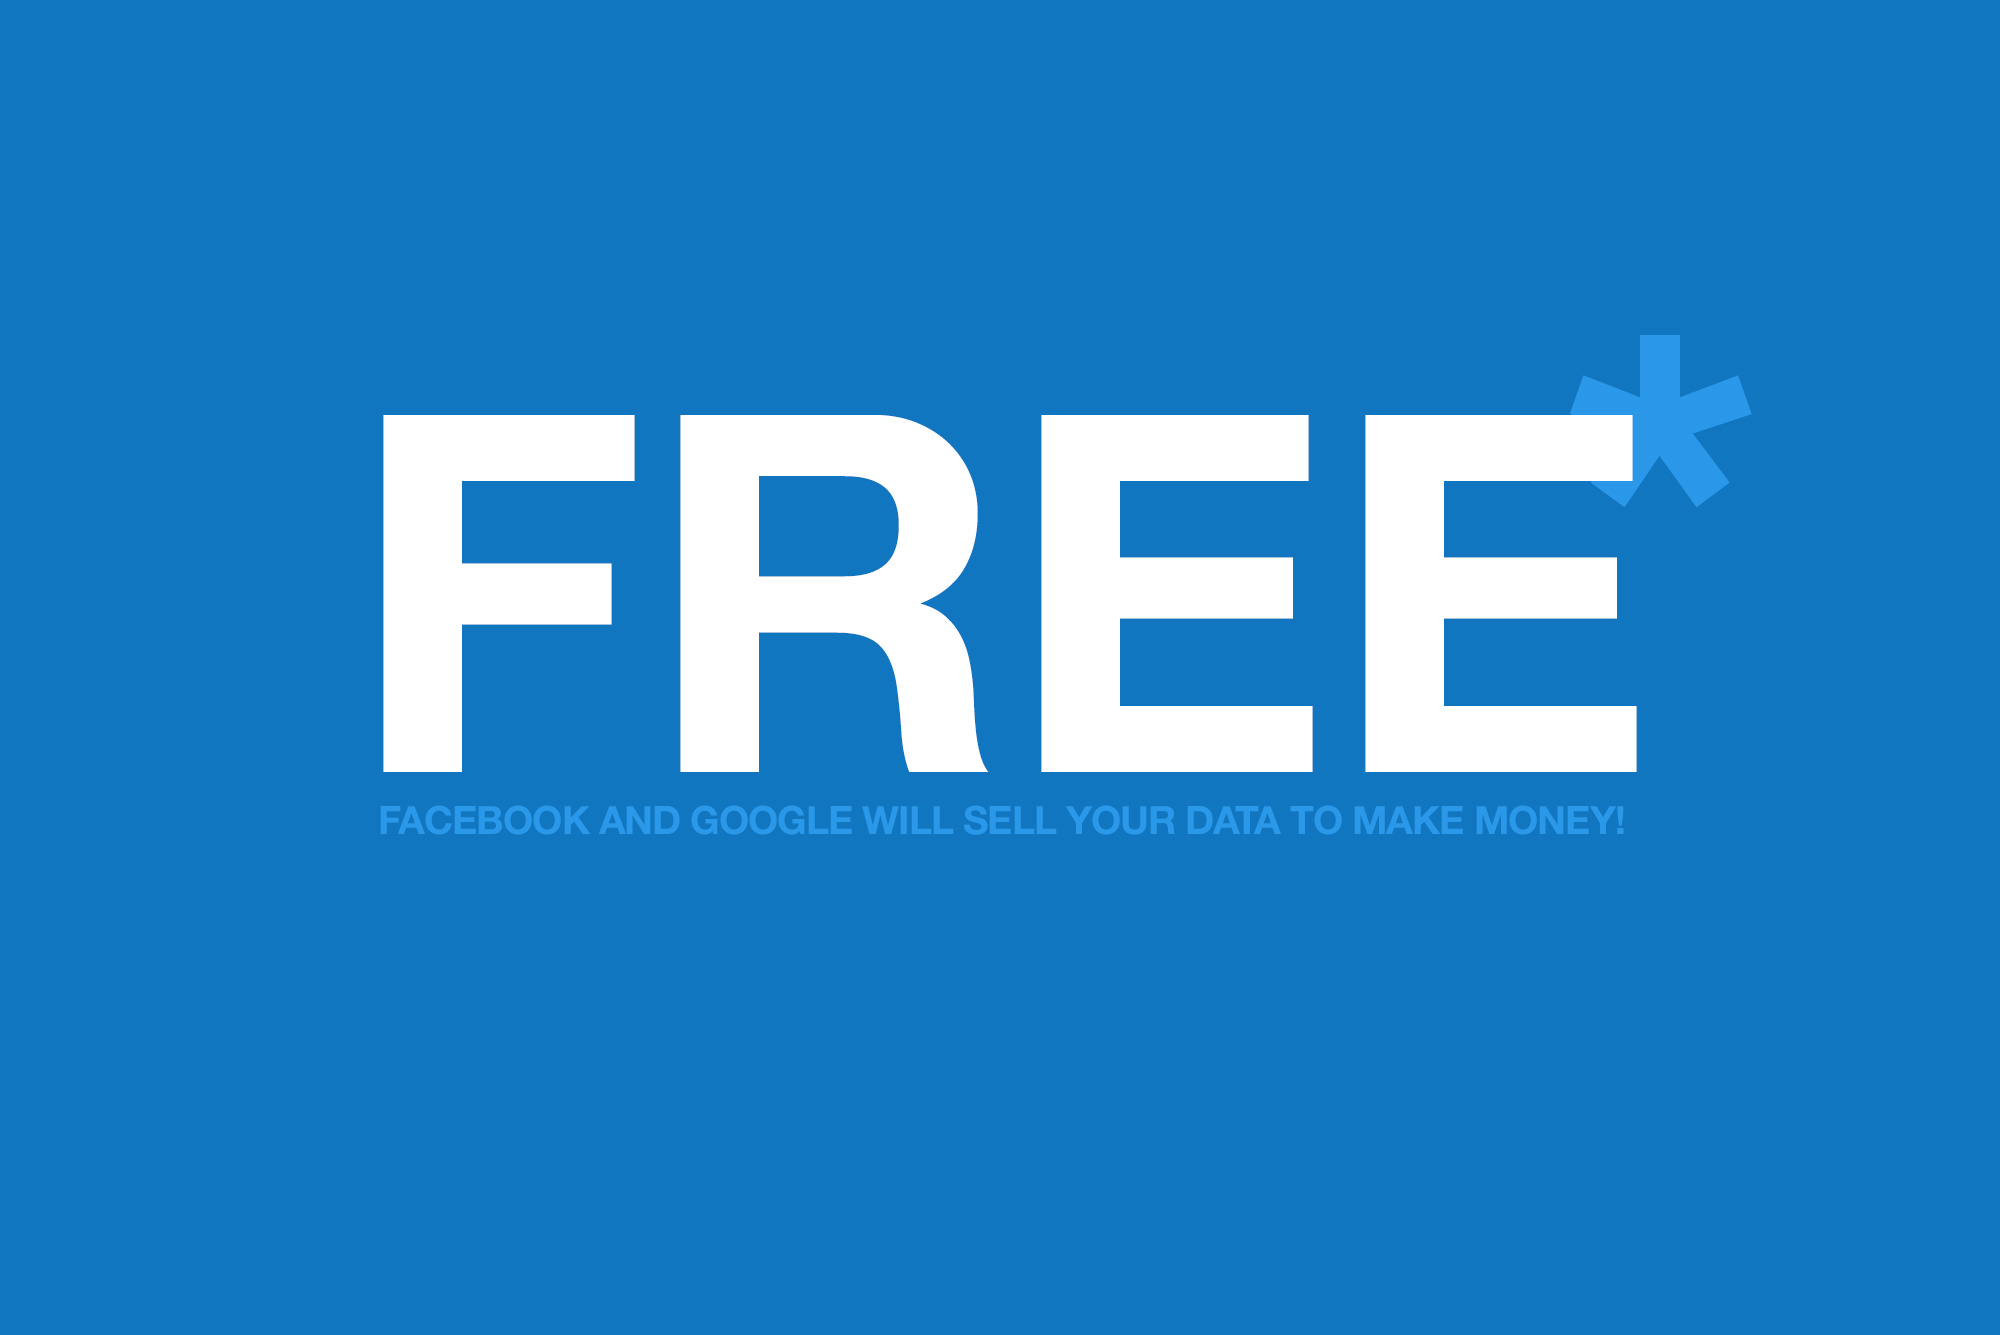 "Free" written in white, with an asterisk in a pale blue colour. Smaller blue text underneath reads "Facebook and Google will sell your data to make money!". Blue background.